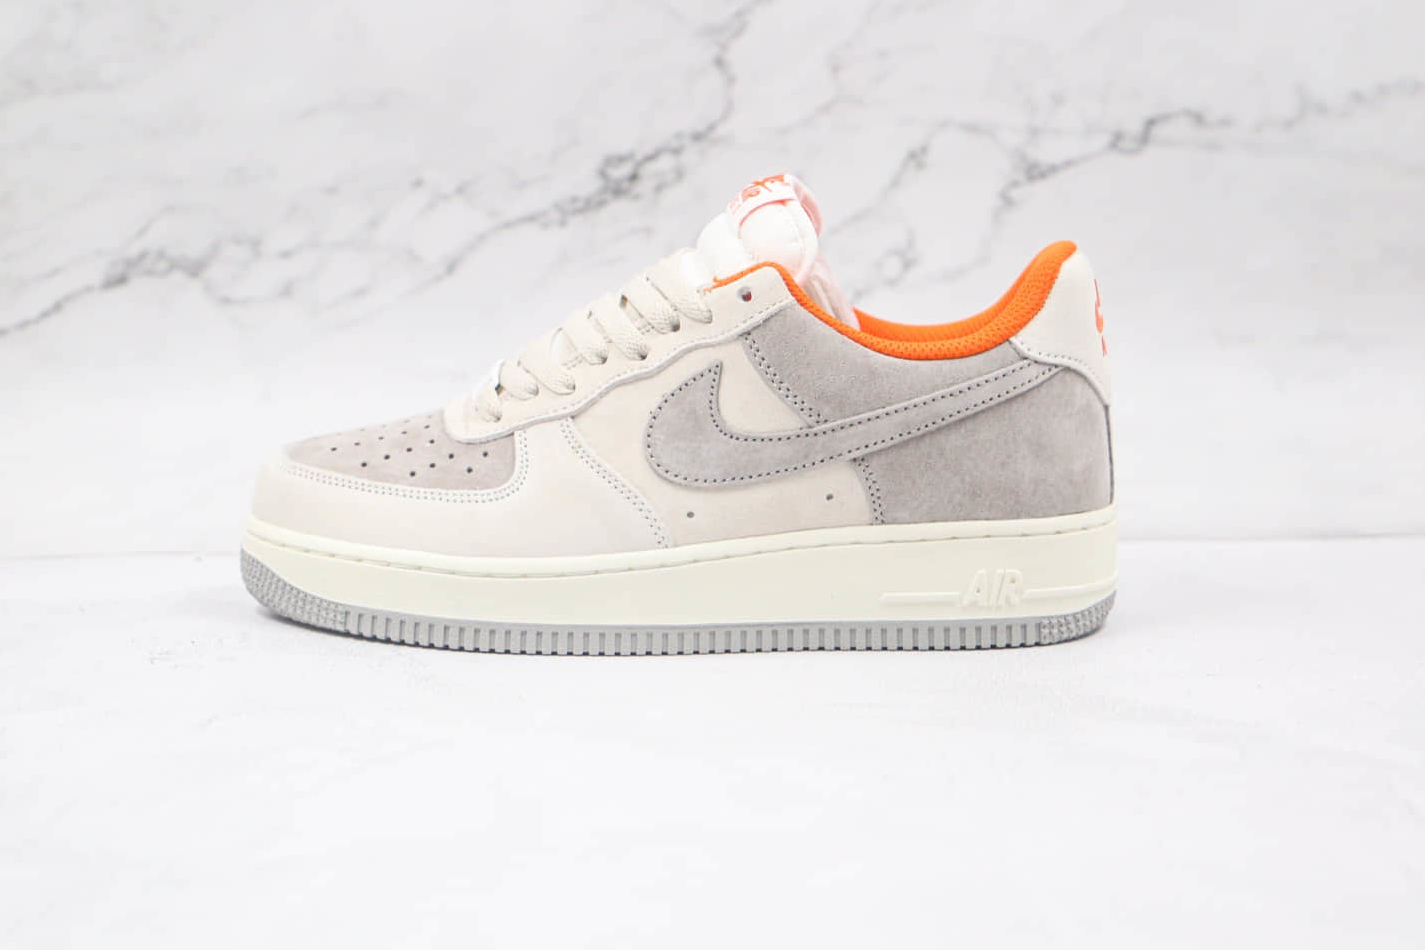 Nike Air Force 1 Low 07 Grey White Brown Casual Shoes CC5059-102 - Stylish and versatile sneakers with a touch of elegance